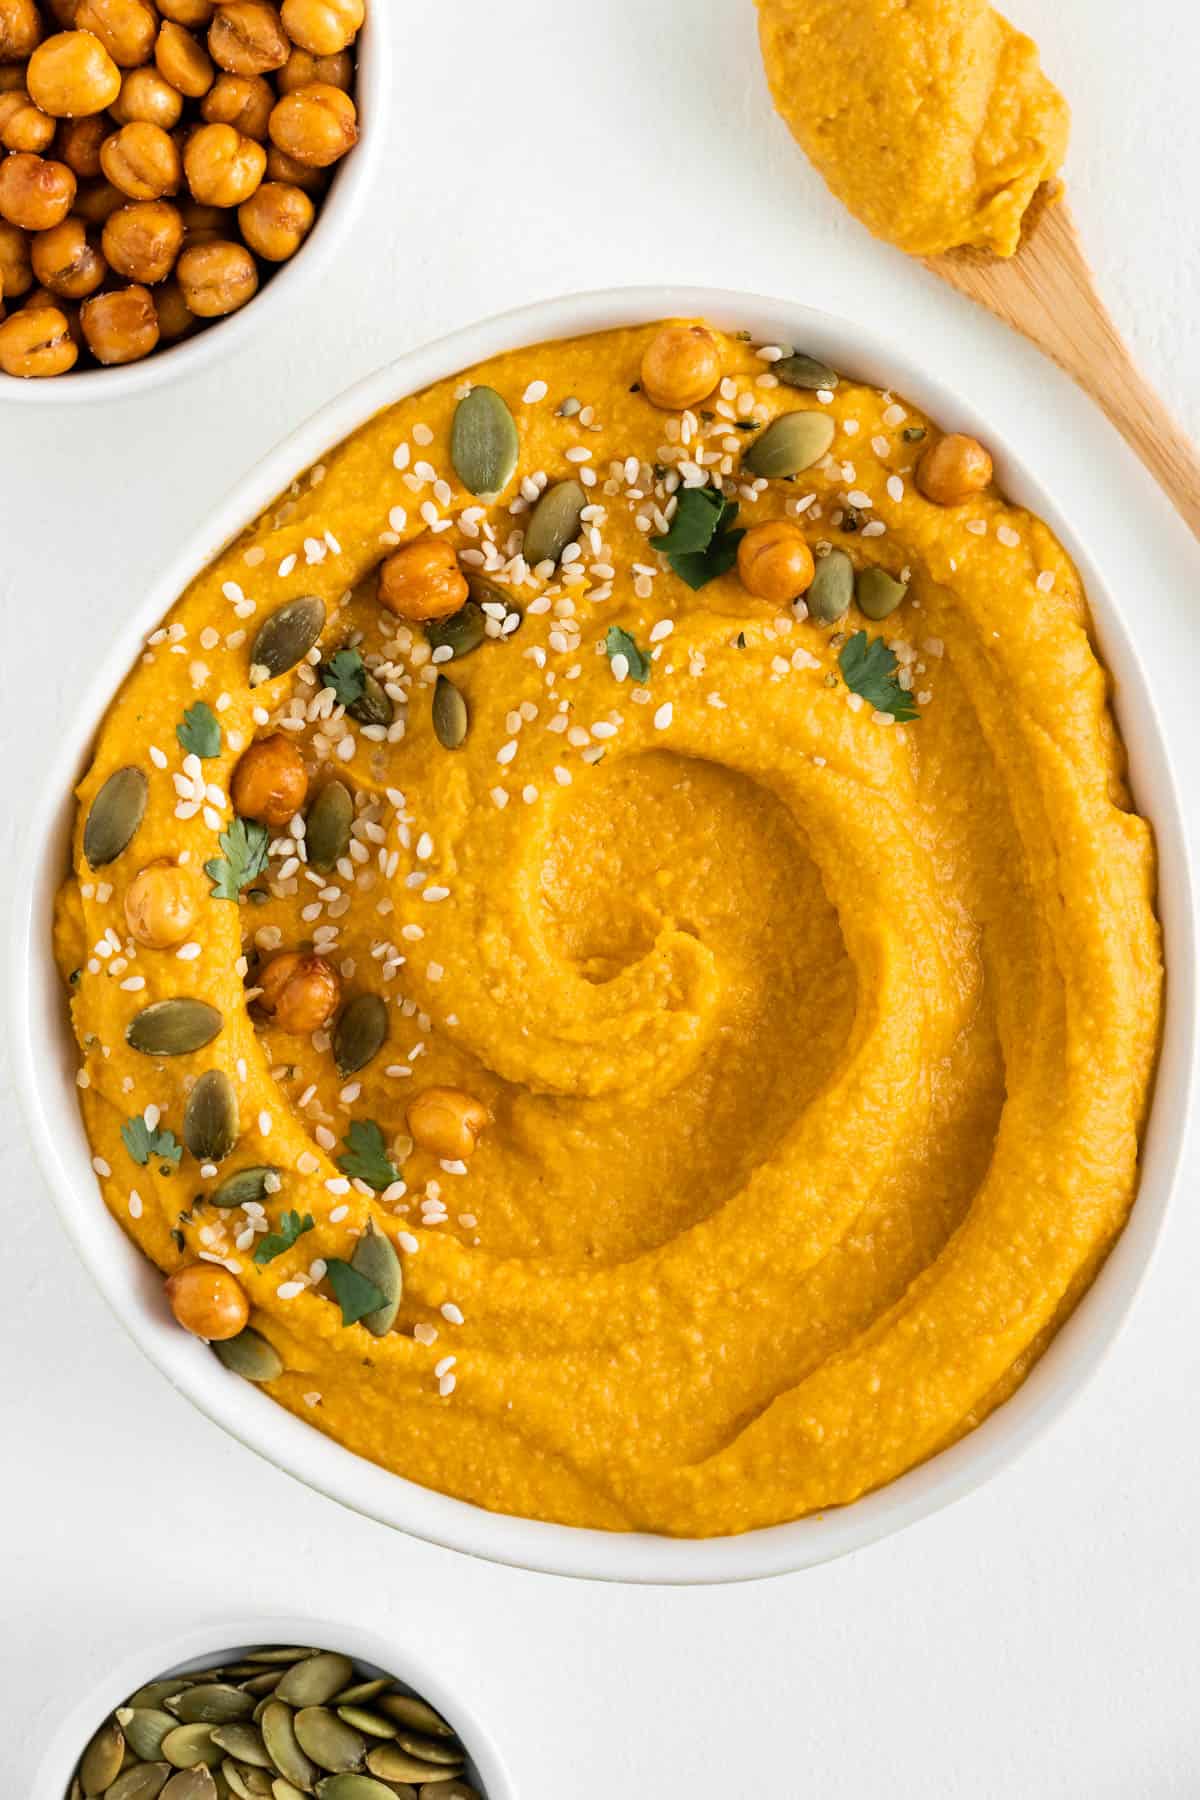 pumpkin hummus in a white bowl surrounded by roasted chickpeas and pumpkin seeds